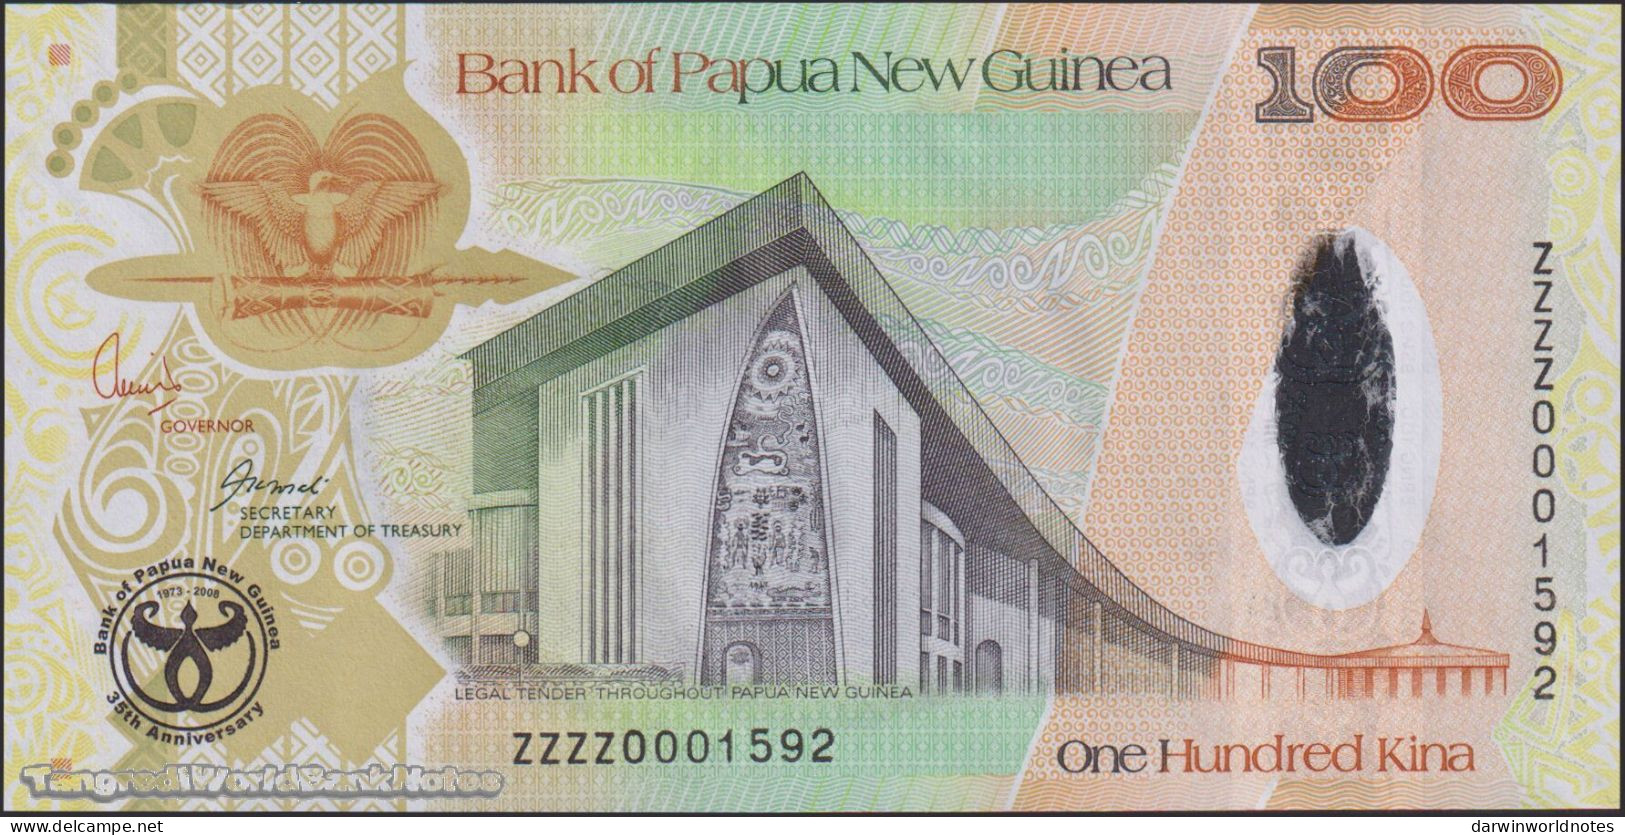 DWN - 350 world UNC different banknotes - FREE PAPUA NEW GUINEA 100 Kina 2008 (P.37) REPLACEMENT ZZZZ